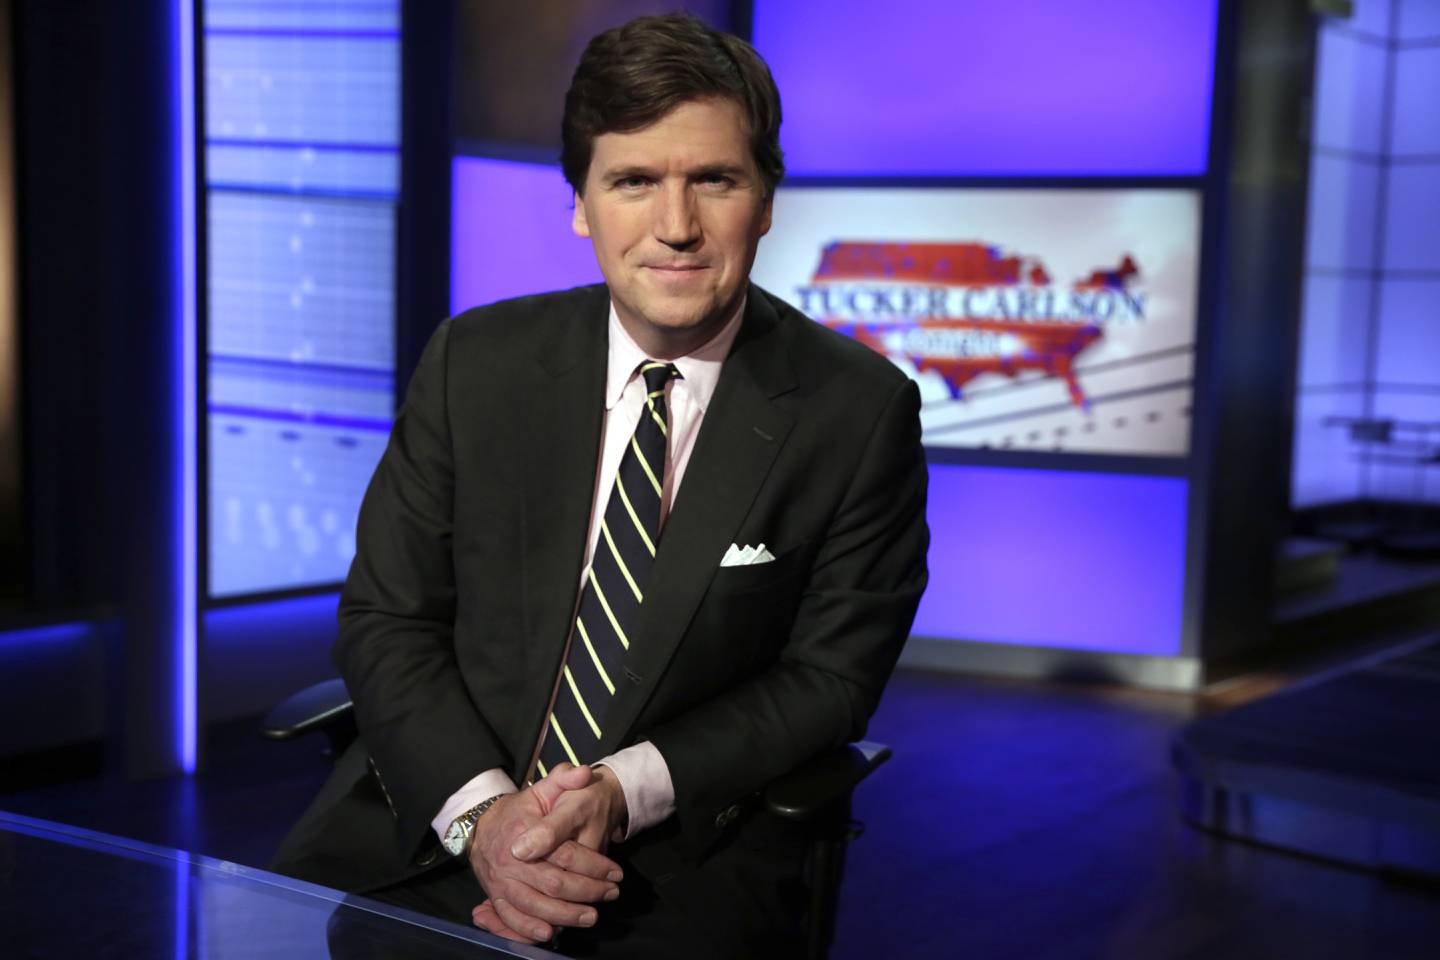 Tucker Carlson, host of "Tucker Carlson Tonight," poses for photos in a Fox News Channel studio in New York. AP